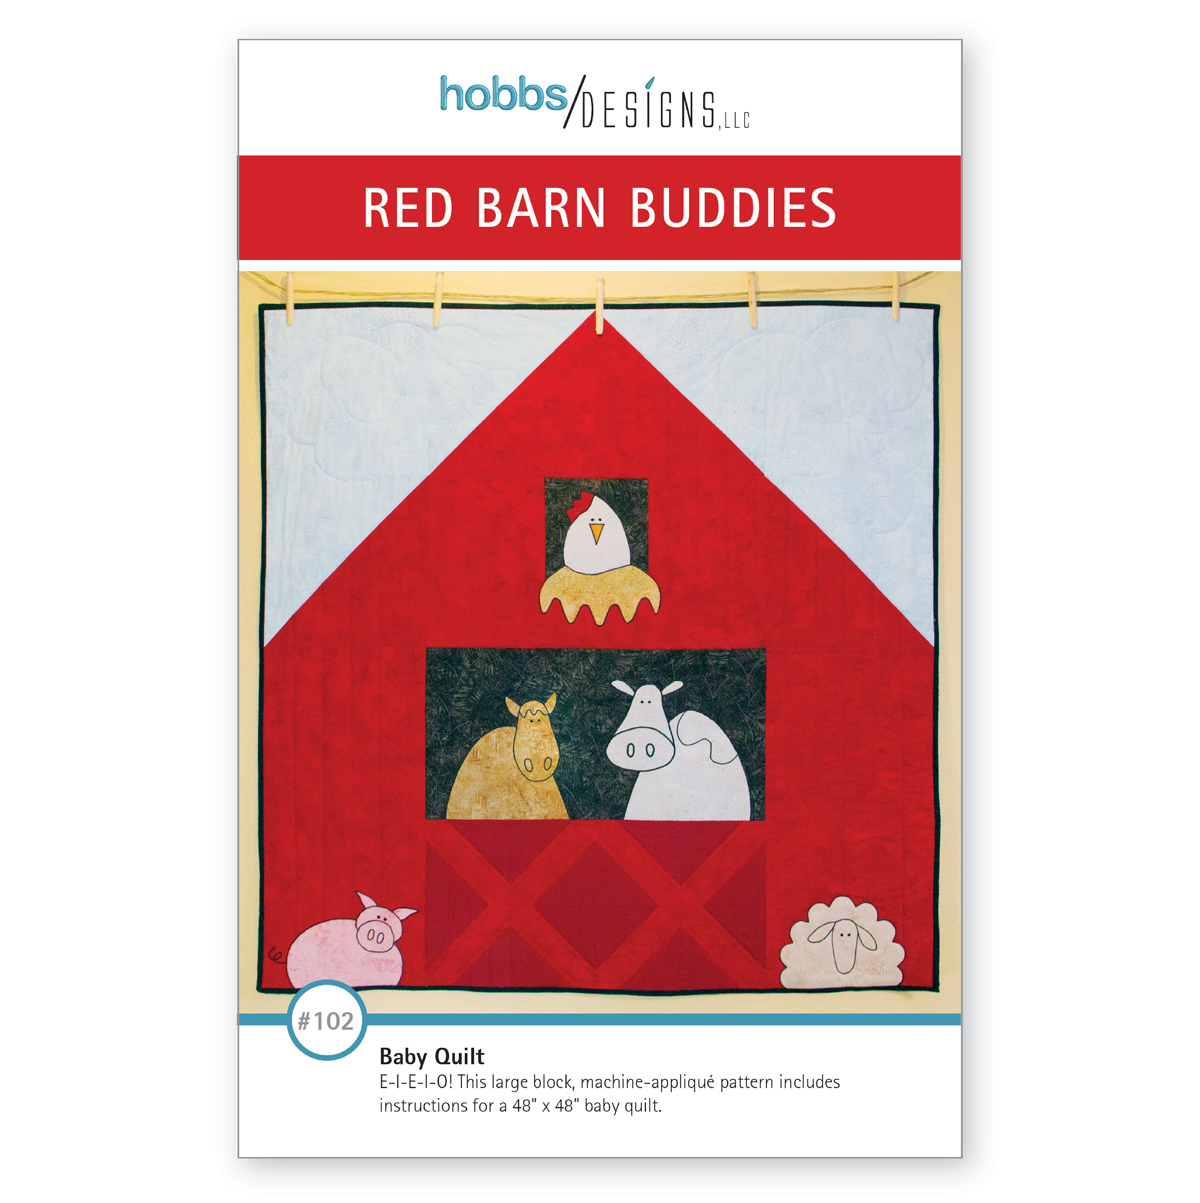 Red Barn Buddies pattern cover